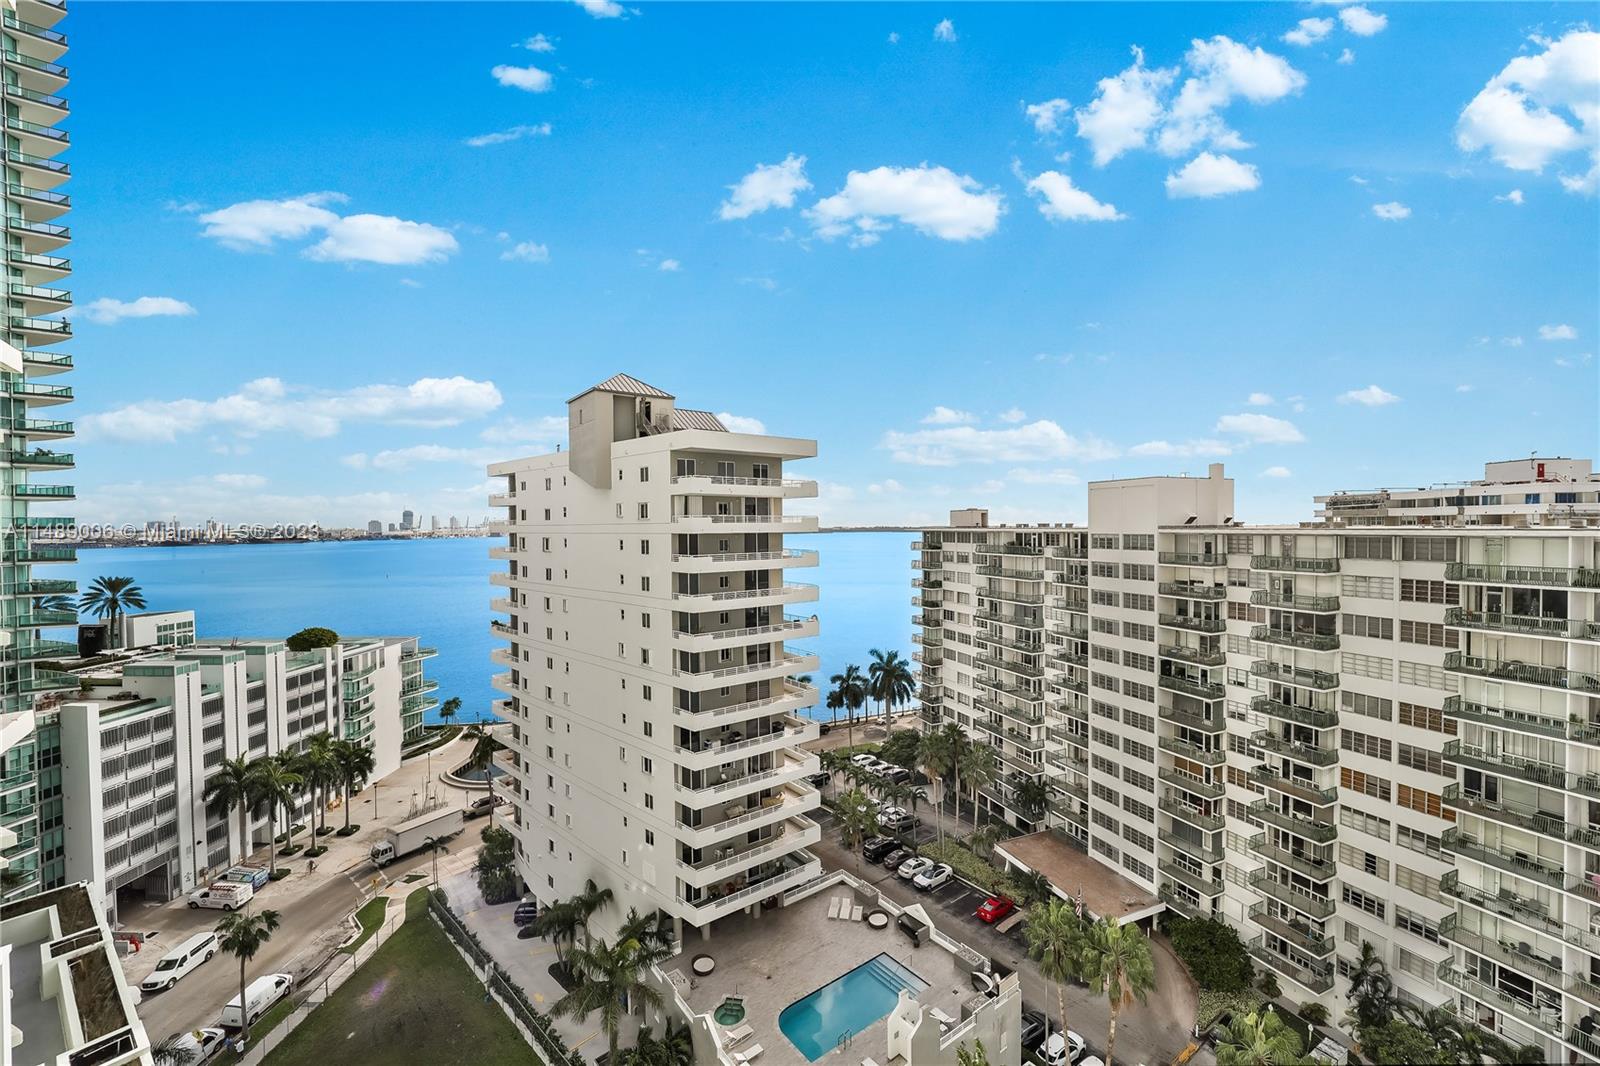 Corner unit fully furnished with amazing water view & skyline. Building is in great location close to restaurants, nightlife, schools, and shopping centers!!!! Can be rented fully furnished for $3,500.00